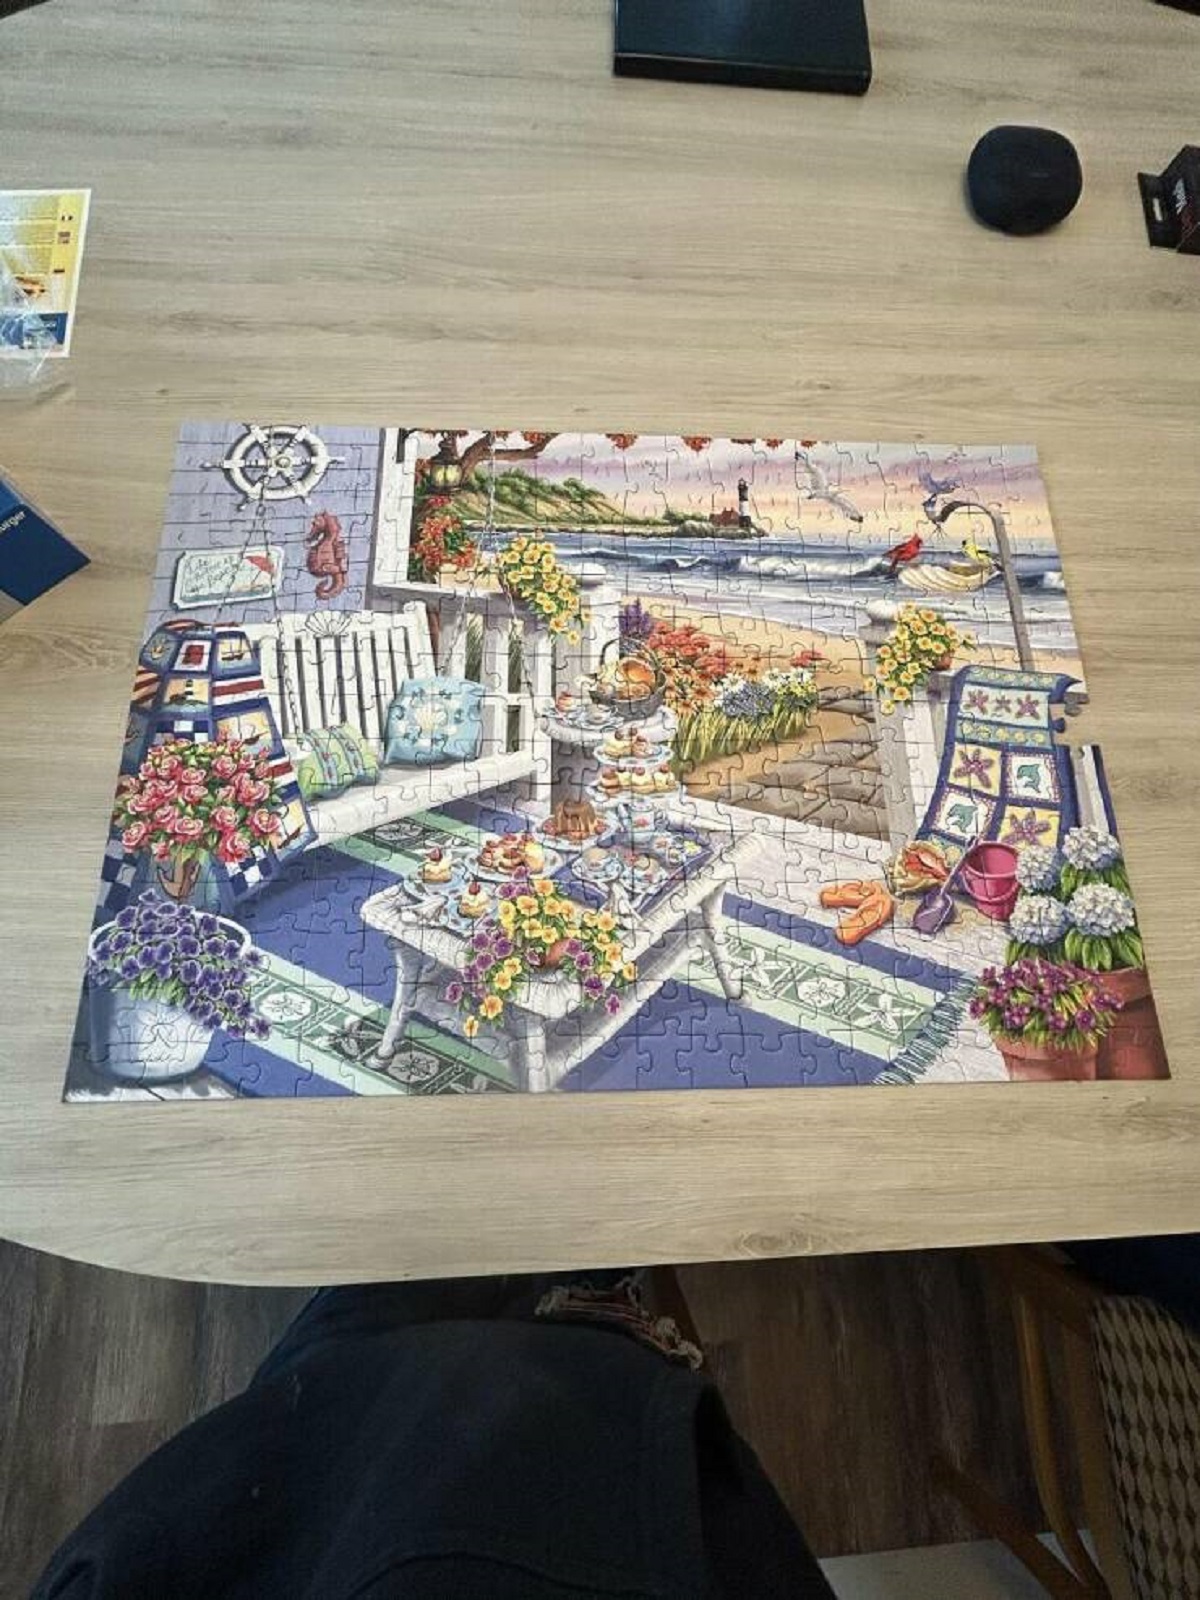 "BRAND NEW puzzle with a piece missing"